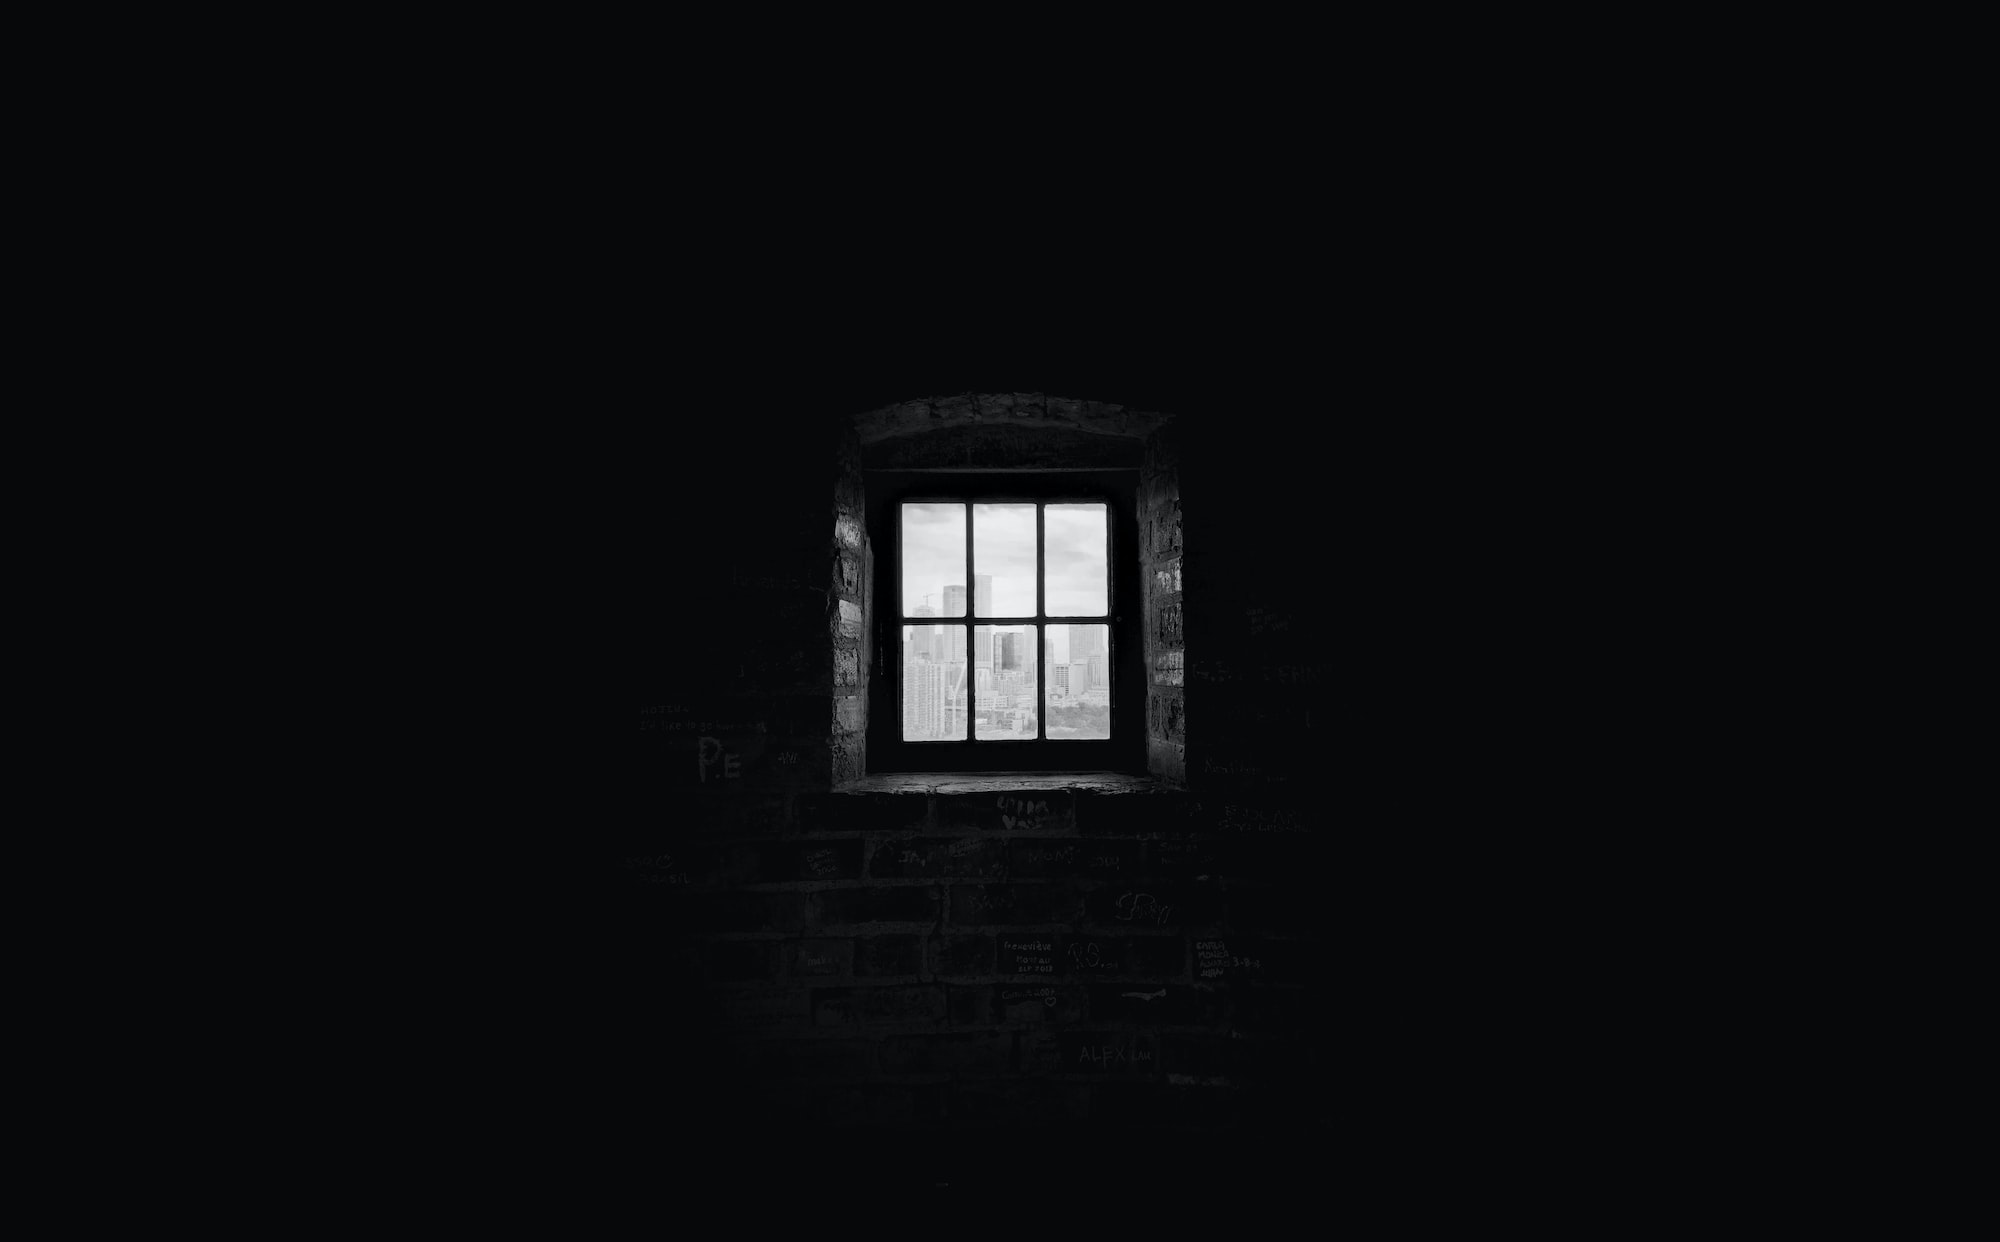 Image of dark room with a small window in the distance that is letting in a little light. Image links to webpage describing narcissistic abuse and its treatment